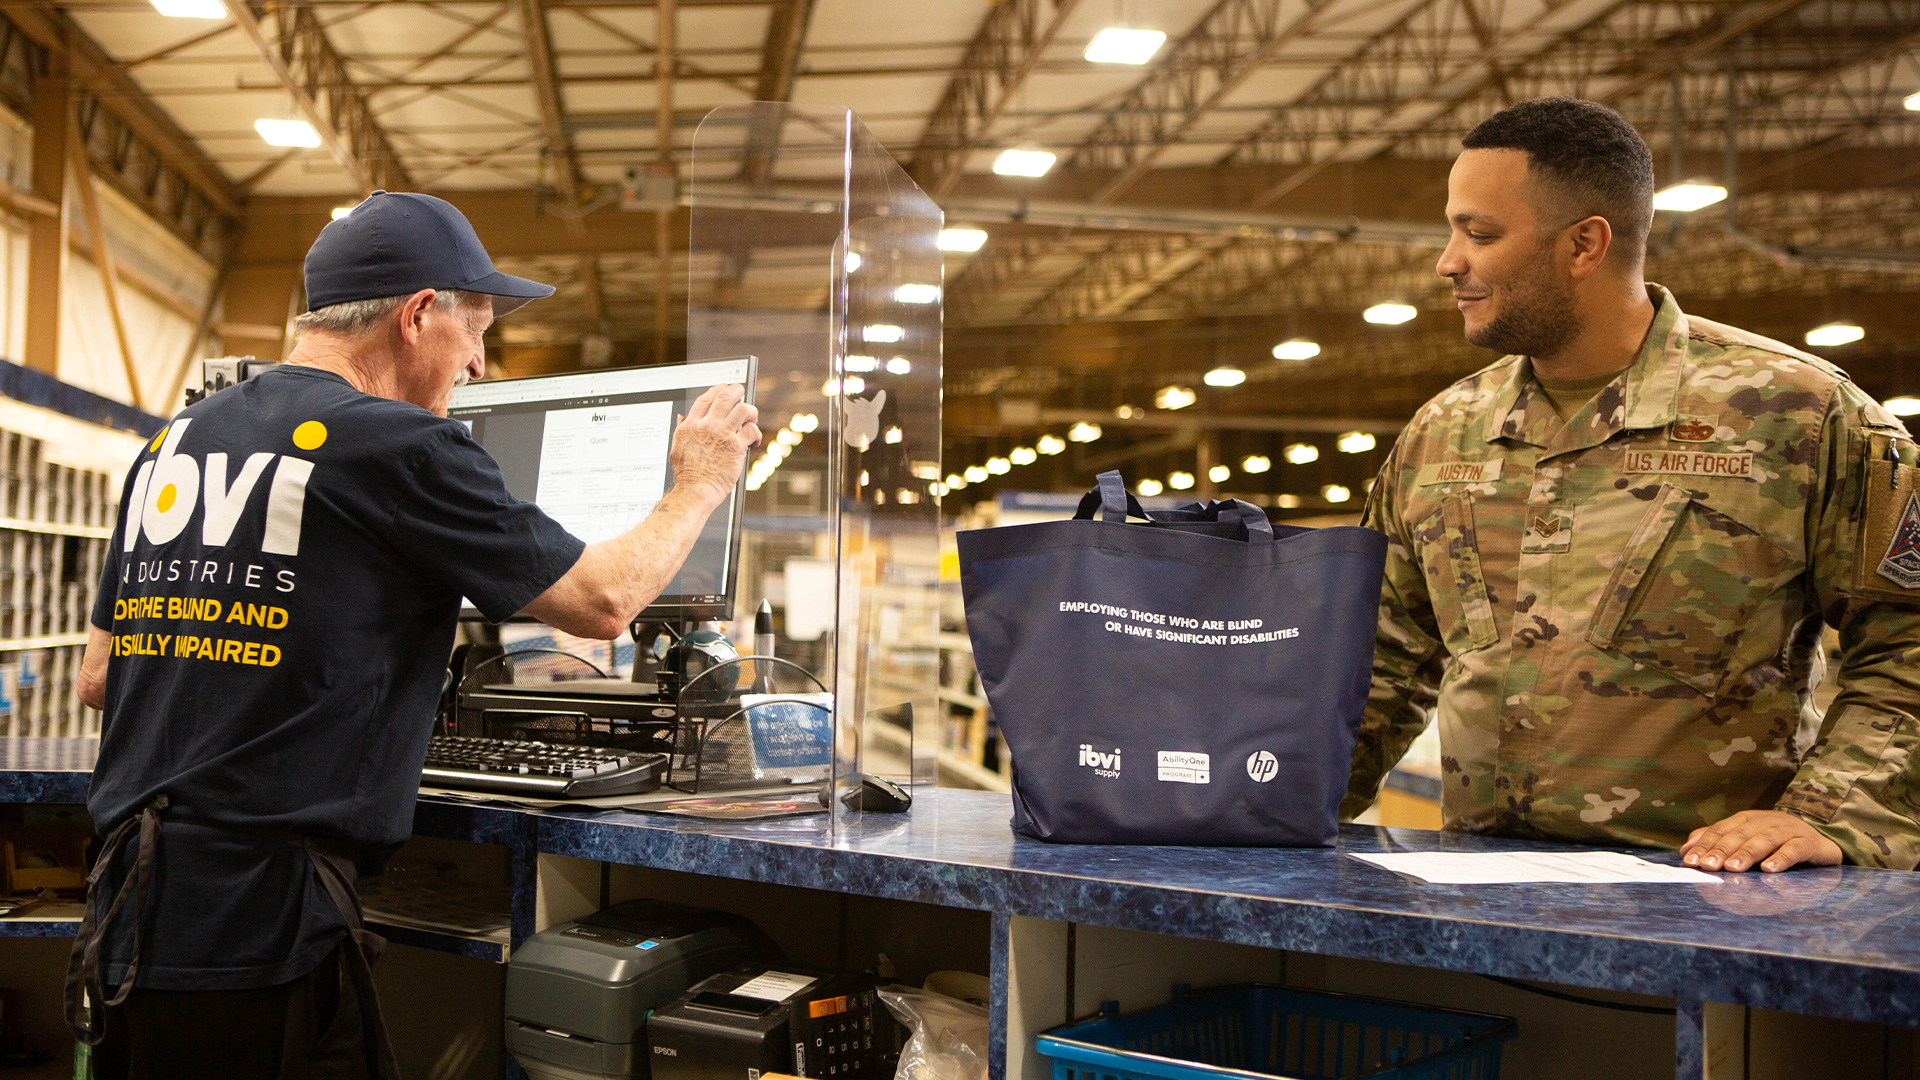 US Air Force getting a bag from an IBVI employee